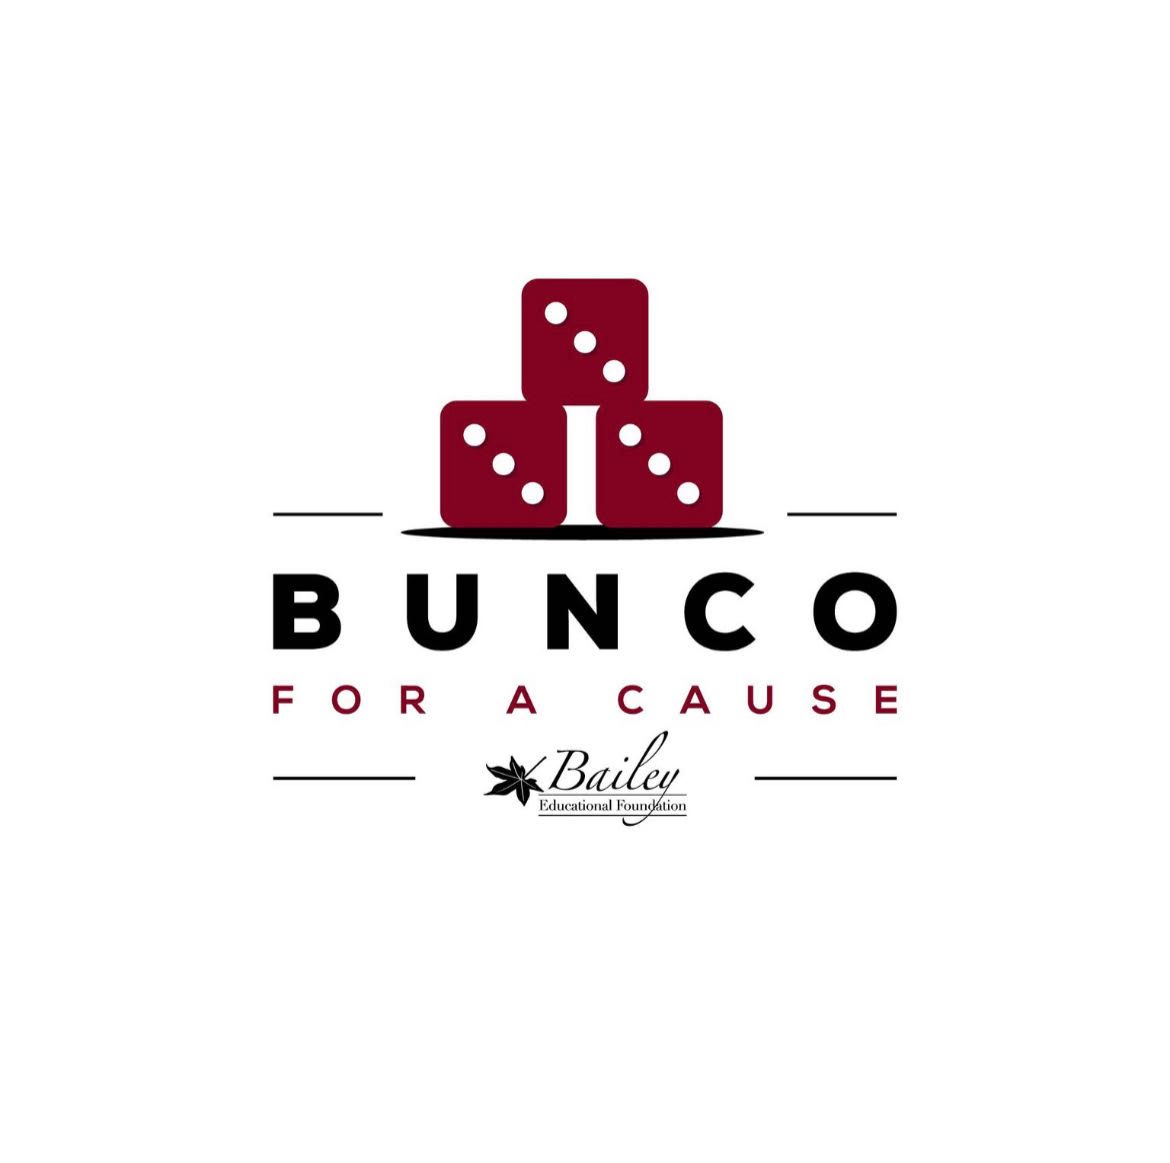 Bunco for a Cause - Ward-Wiseman Animal Haven